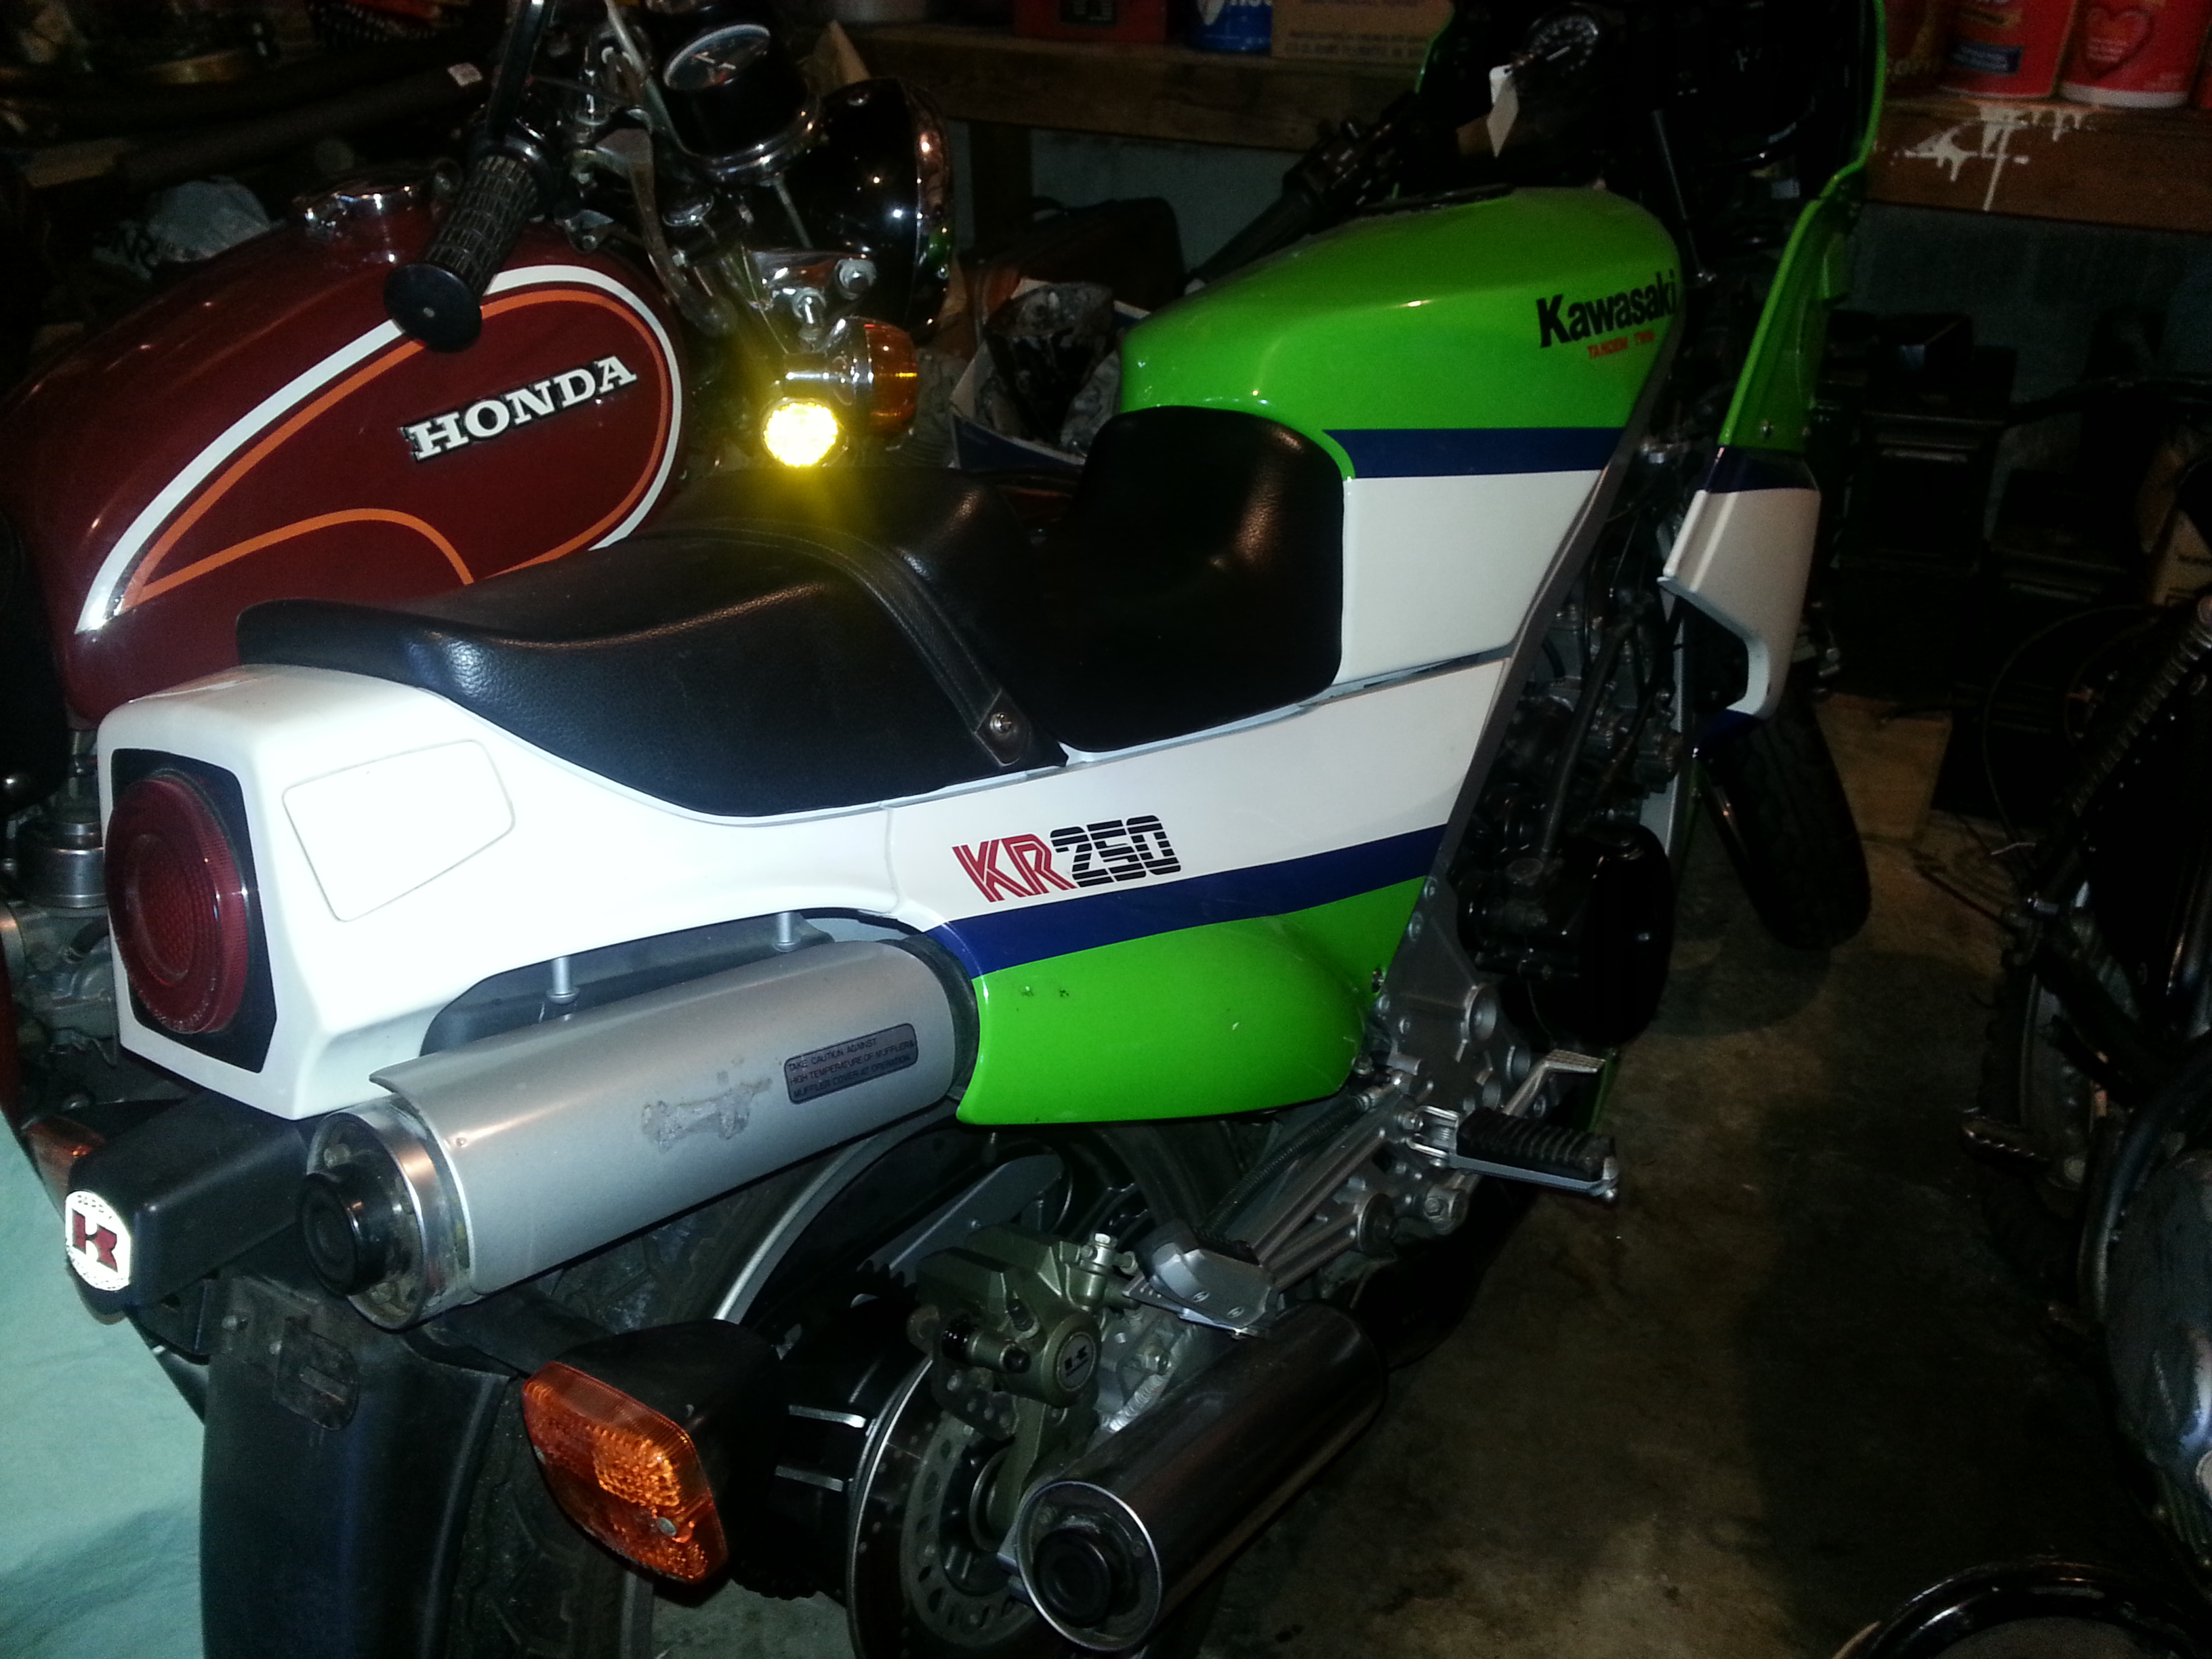 KR250 for sale in USA